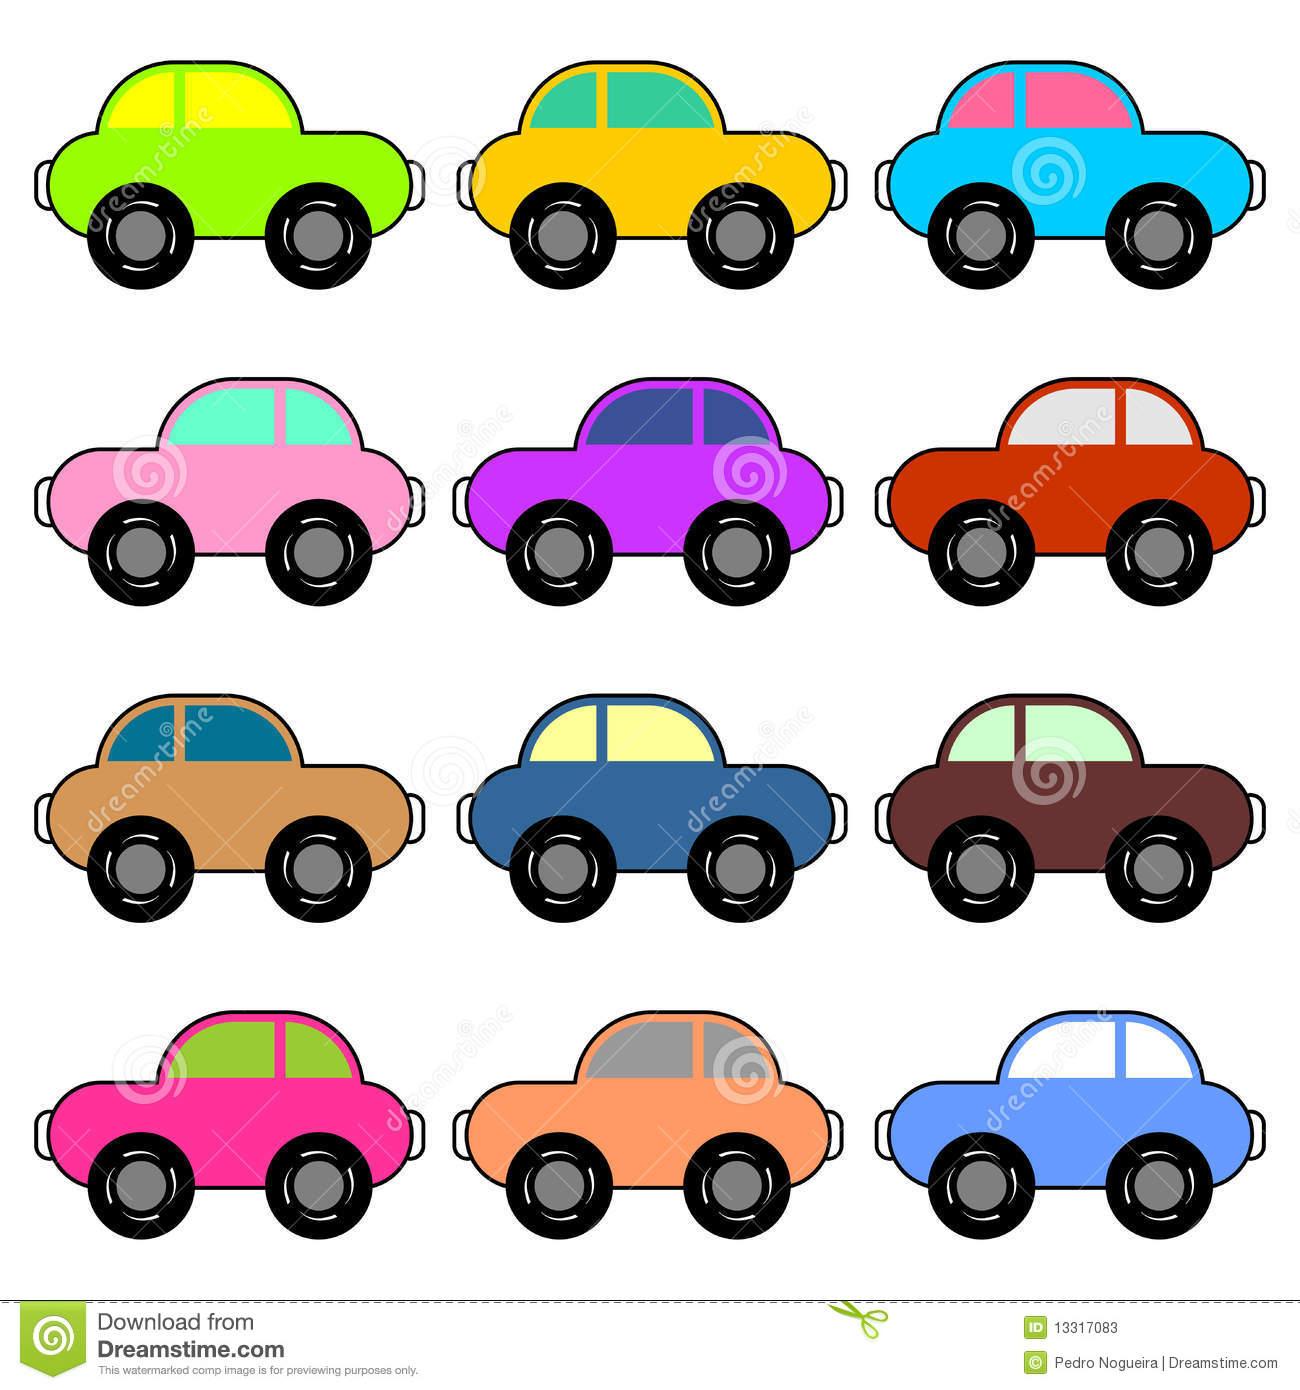 clipart images of cars - photo #50